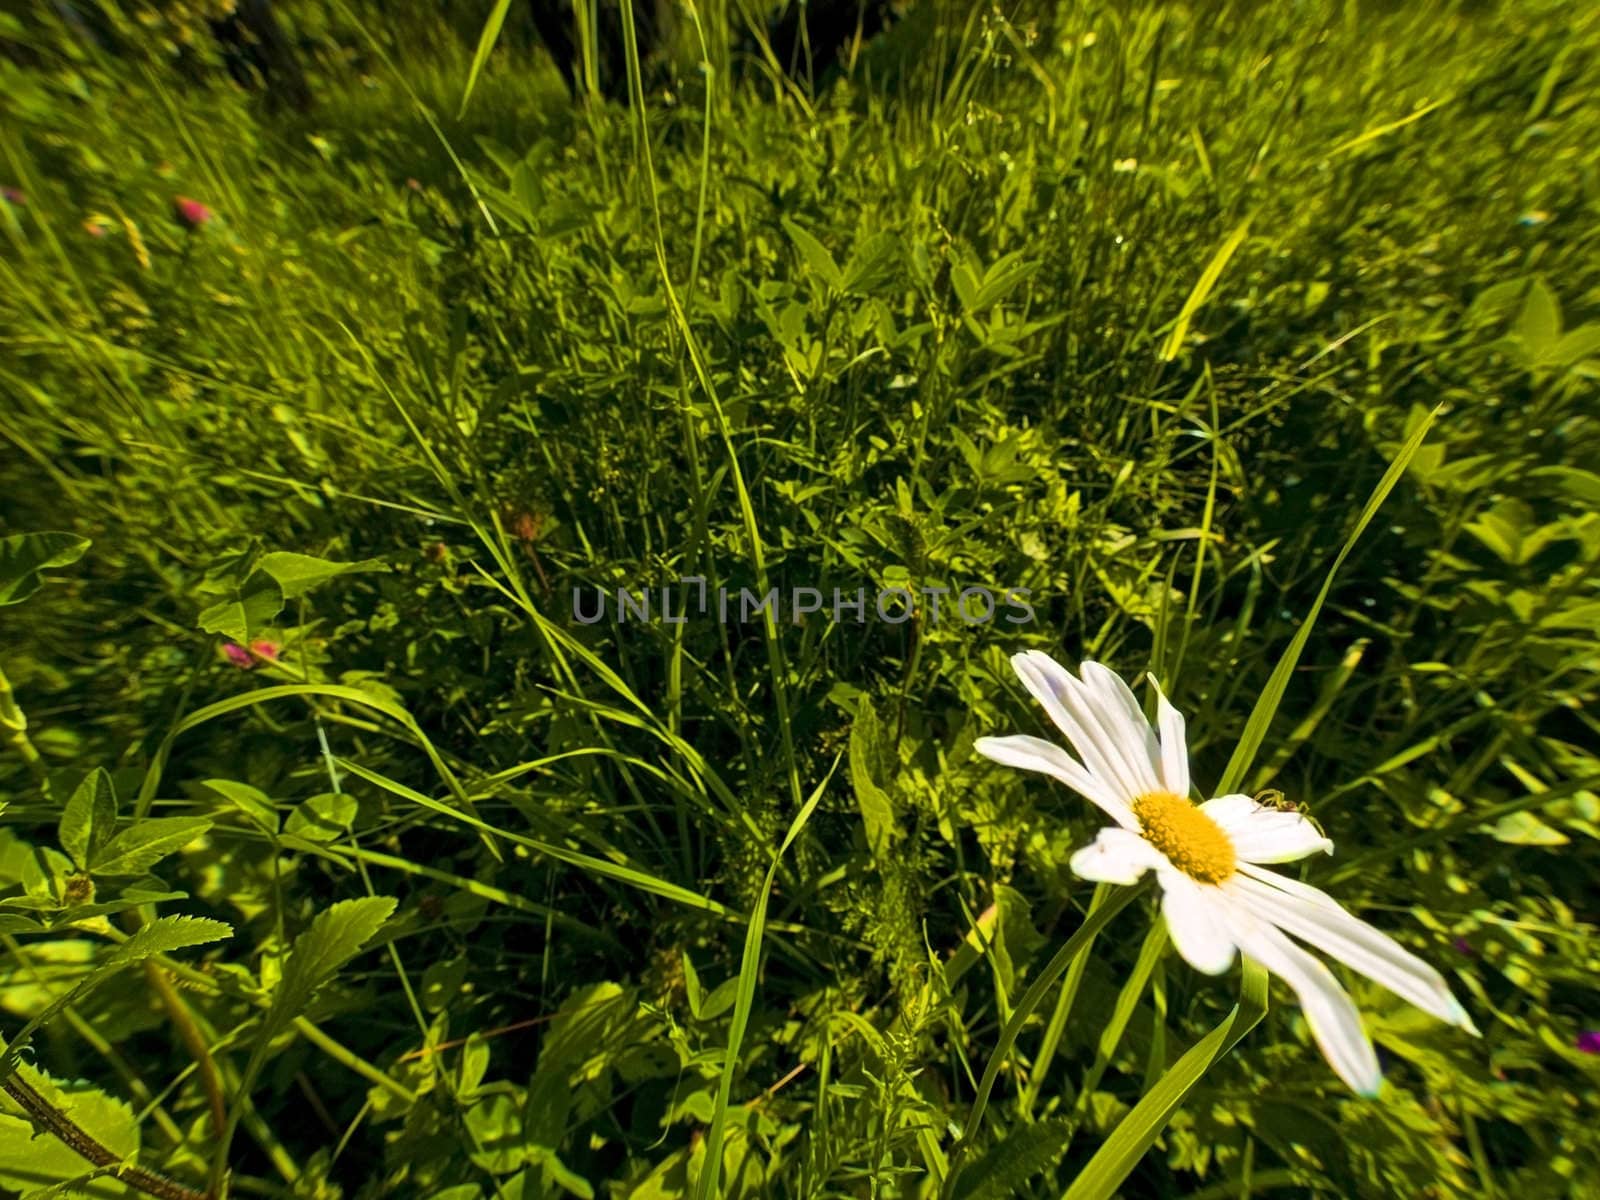 Wide angle shot of chamomile in forest. Focus on nearest flower